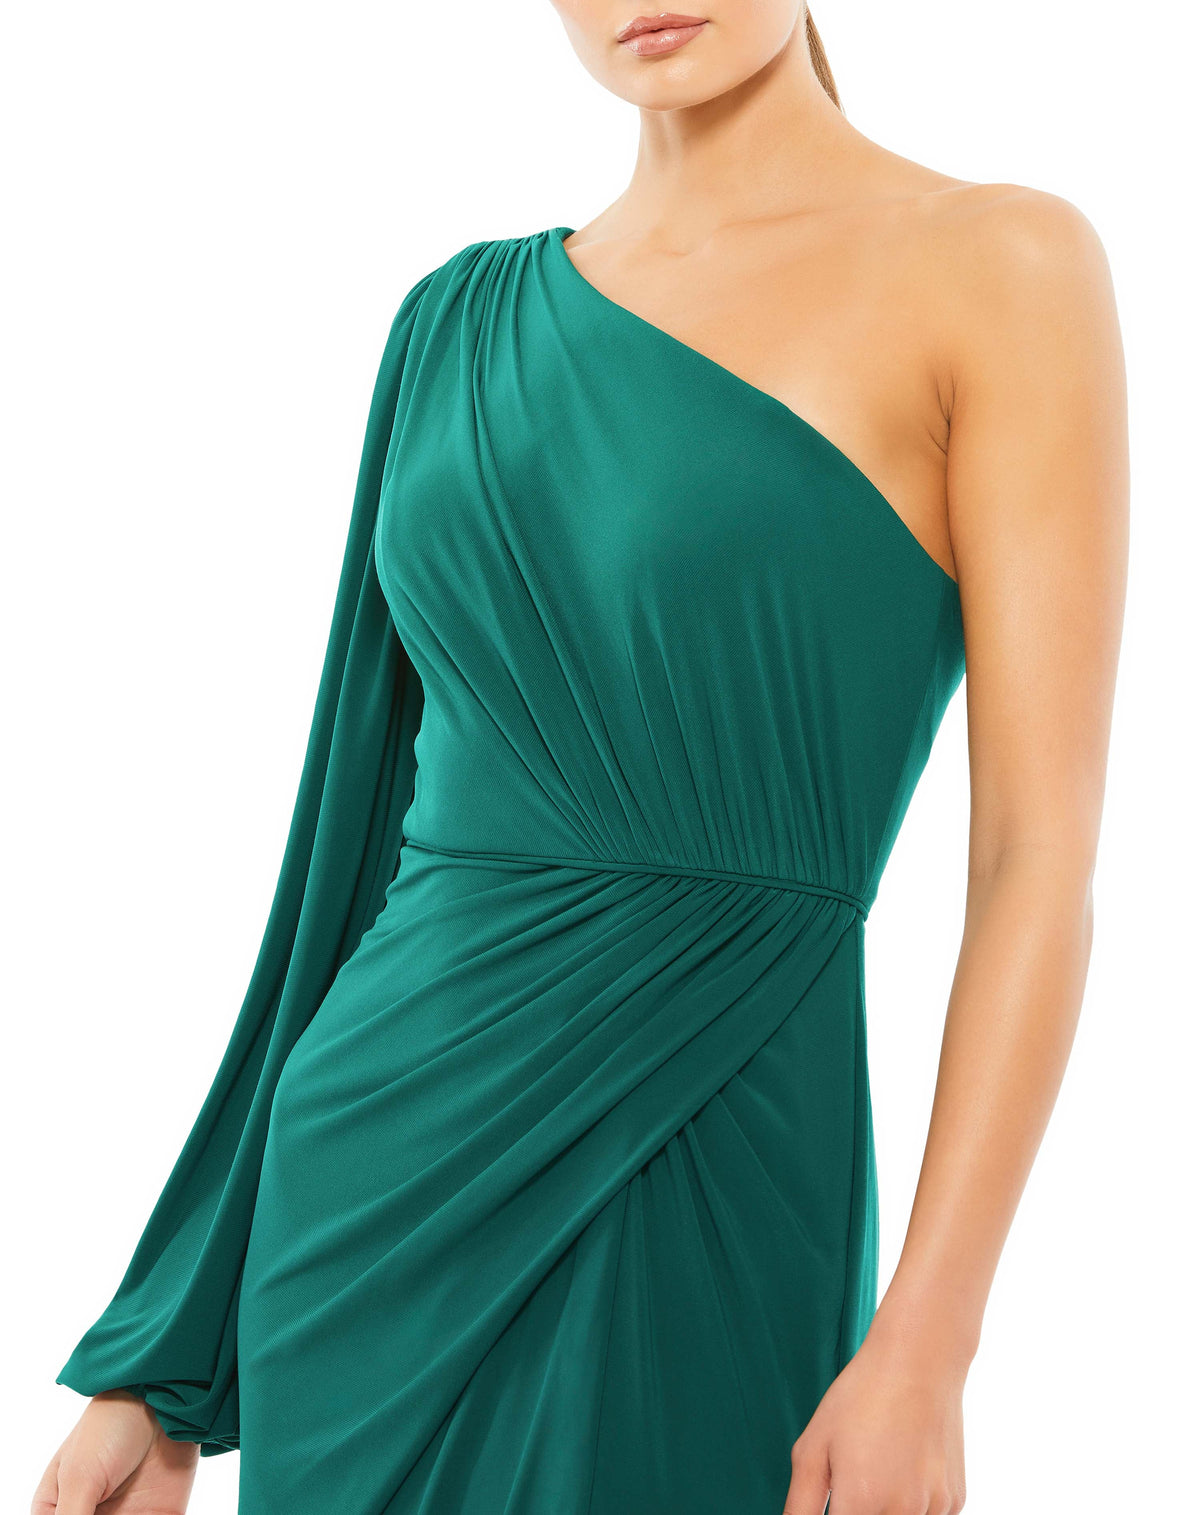  cThis stunning Ieena for Mac Duggal elegant, emerald green long-sleeved, evening gown is a beautiful, full-length evening dress with asymmetric detail. With one sexy-thigh high split, dress is perfect for proms, black-tie affairs, weddings and special events!l close up